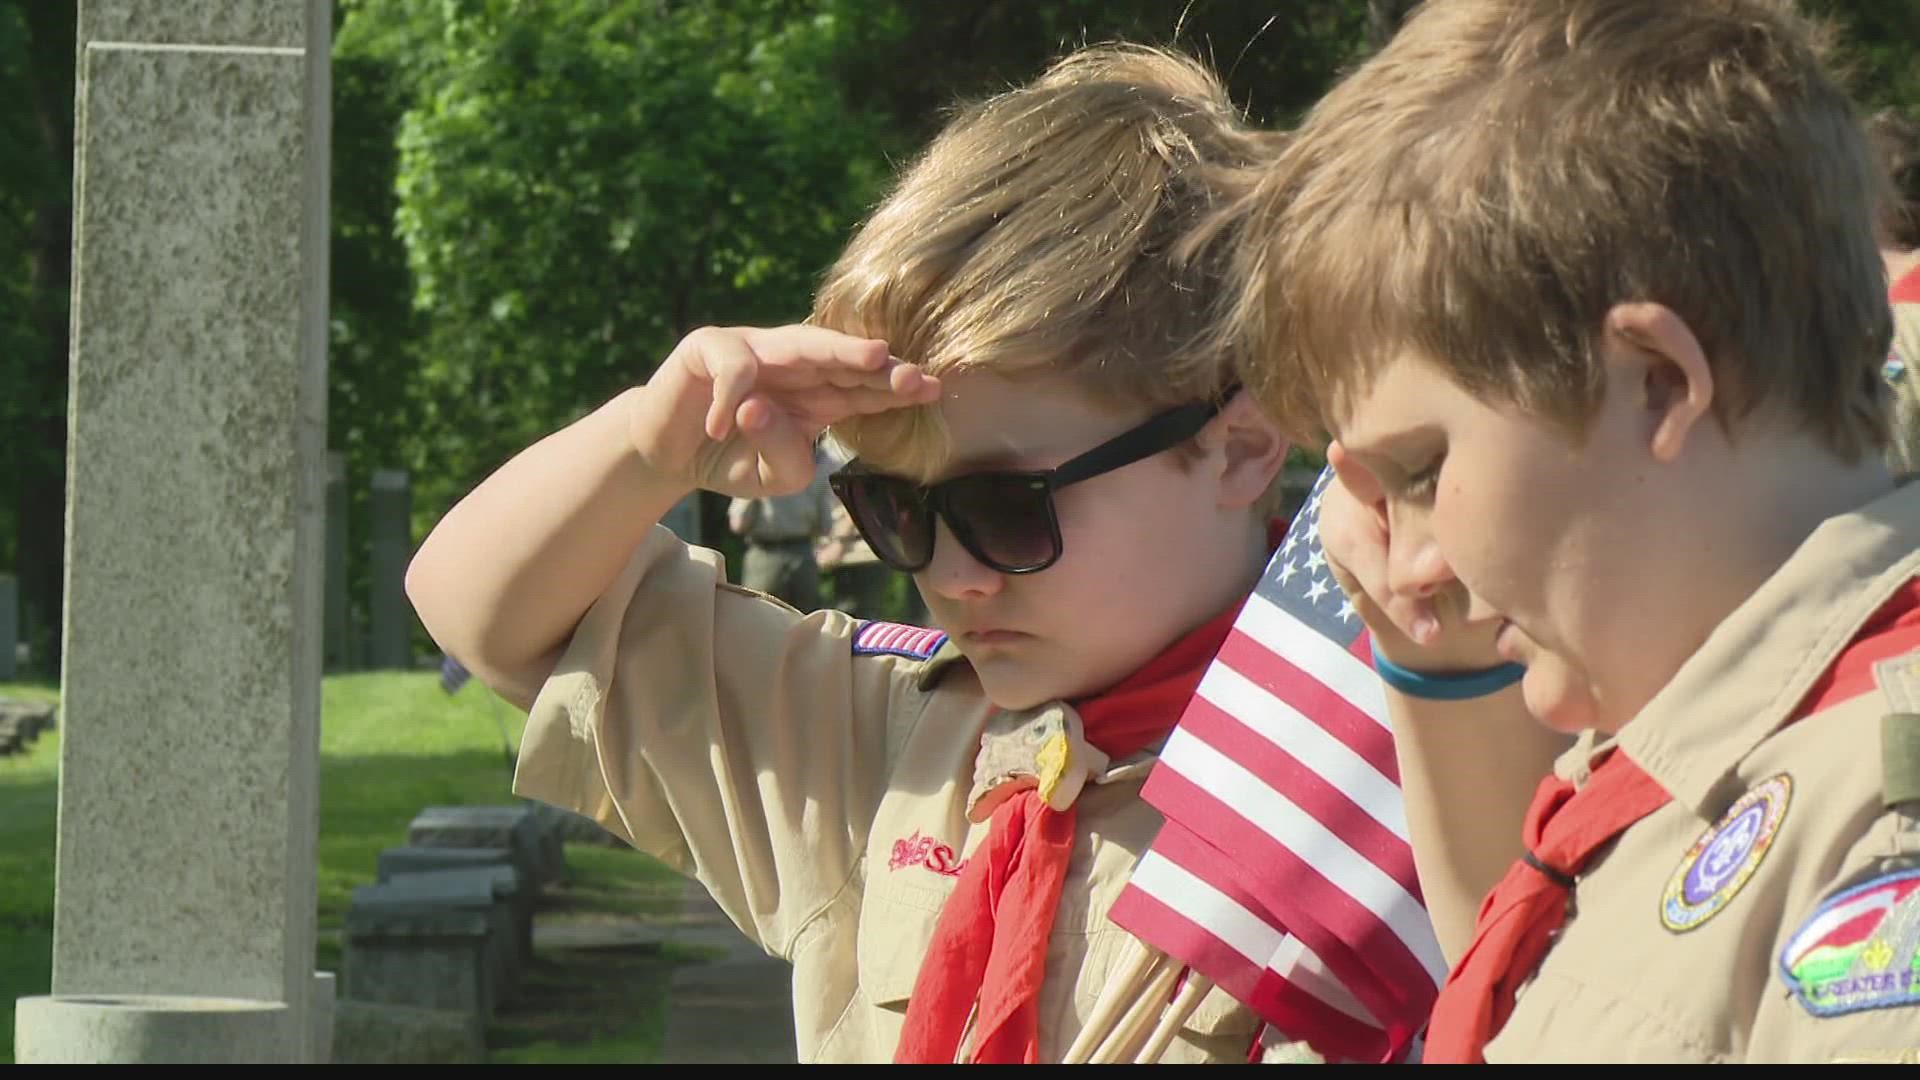 About 5,000 Boy Scouts participated in the flag placing.